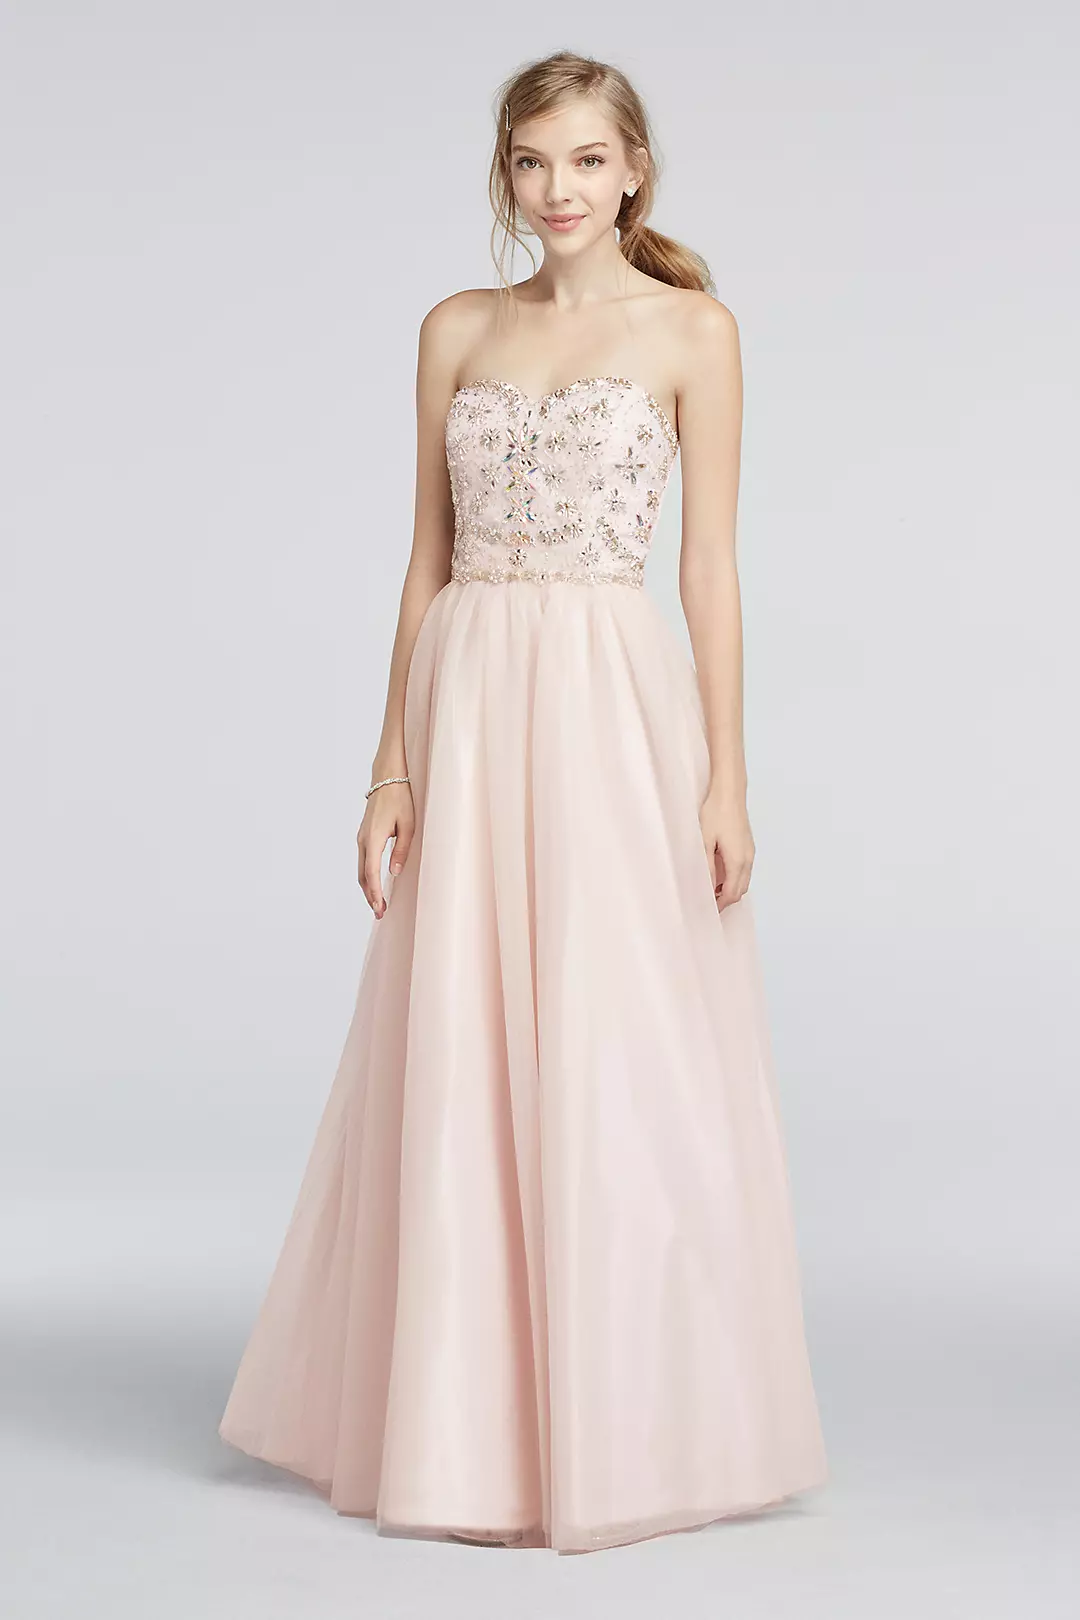 Strapless Mesh Prom Dress with Beaded Bodice Image